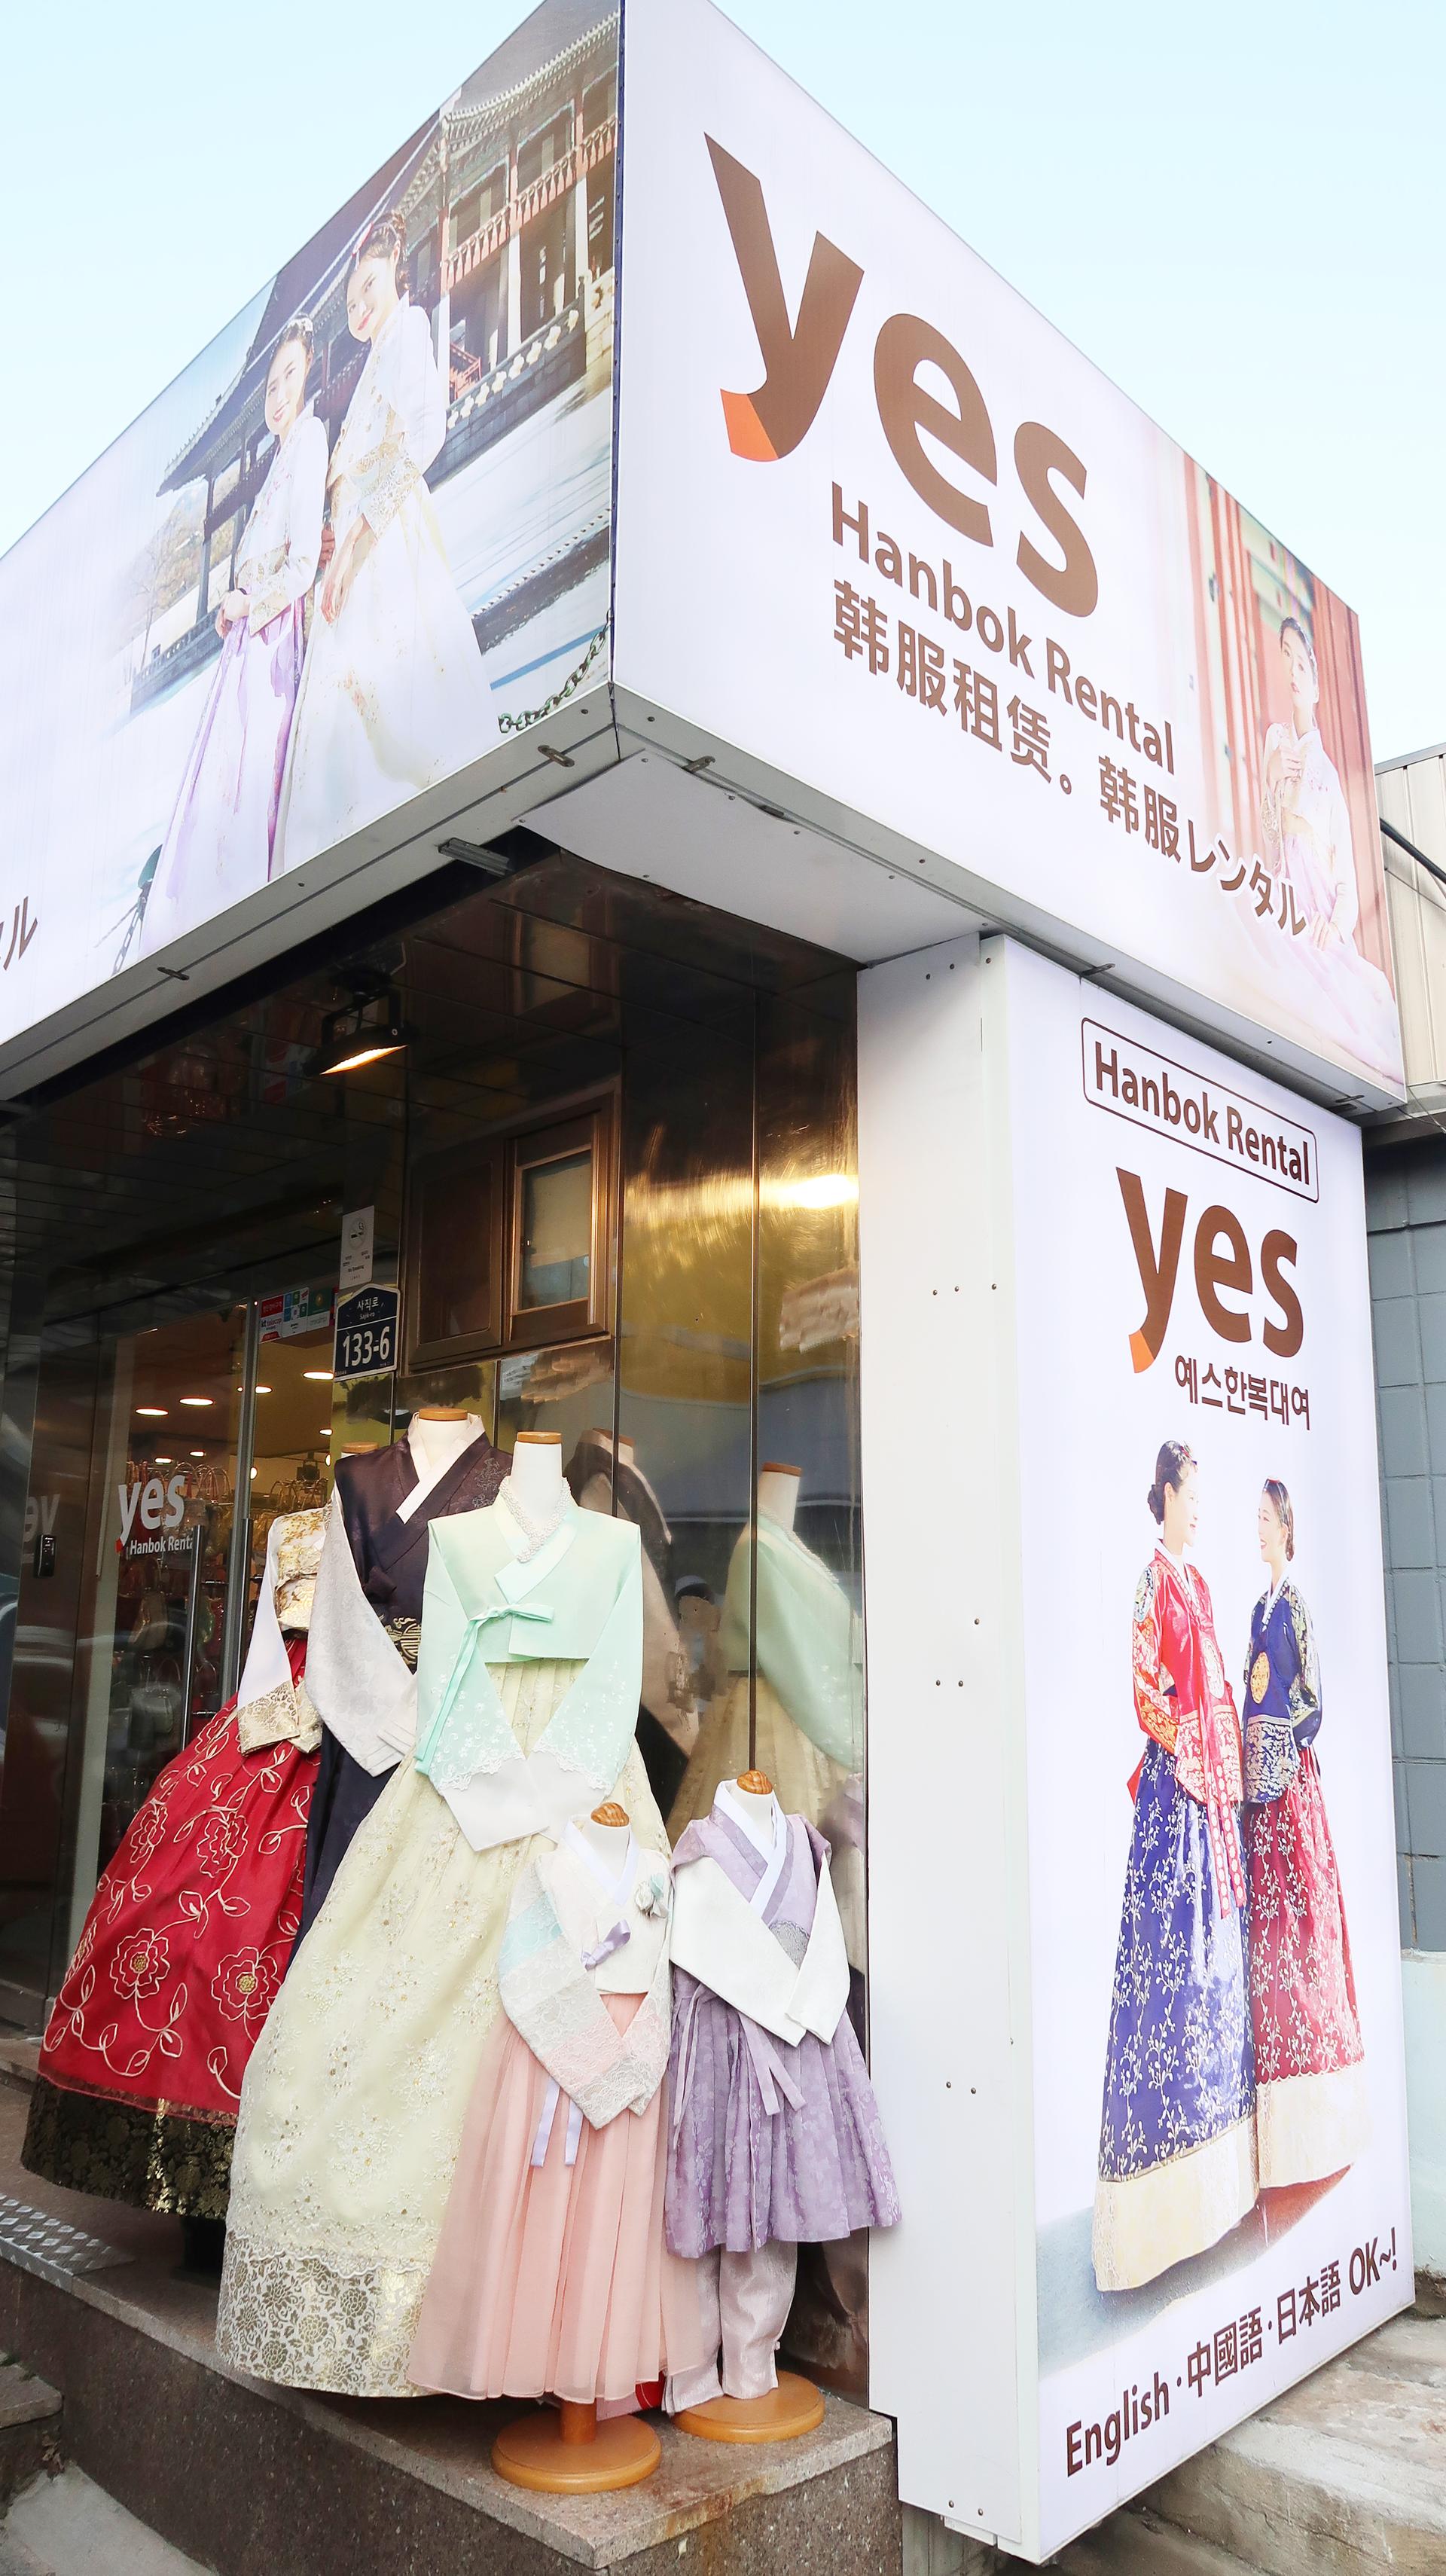 A storefront for 예스한복 in Seoul, offering traditional Korean fashion design, with a bright white facade and a billboard featuring a model wearing their clothing.